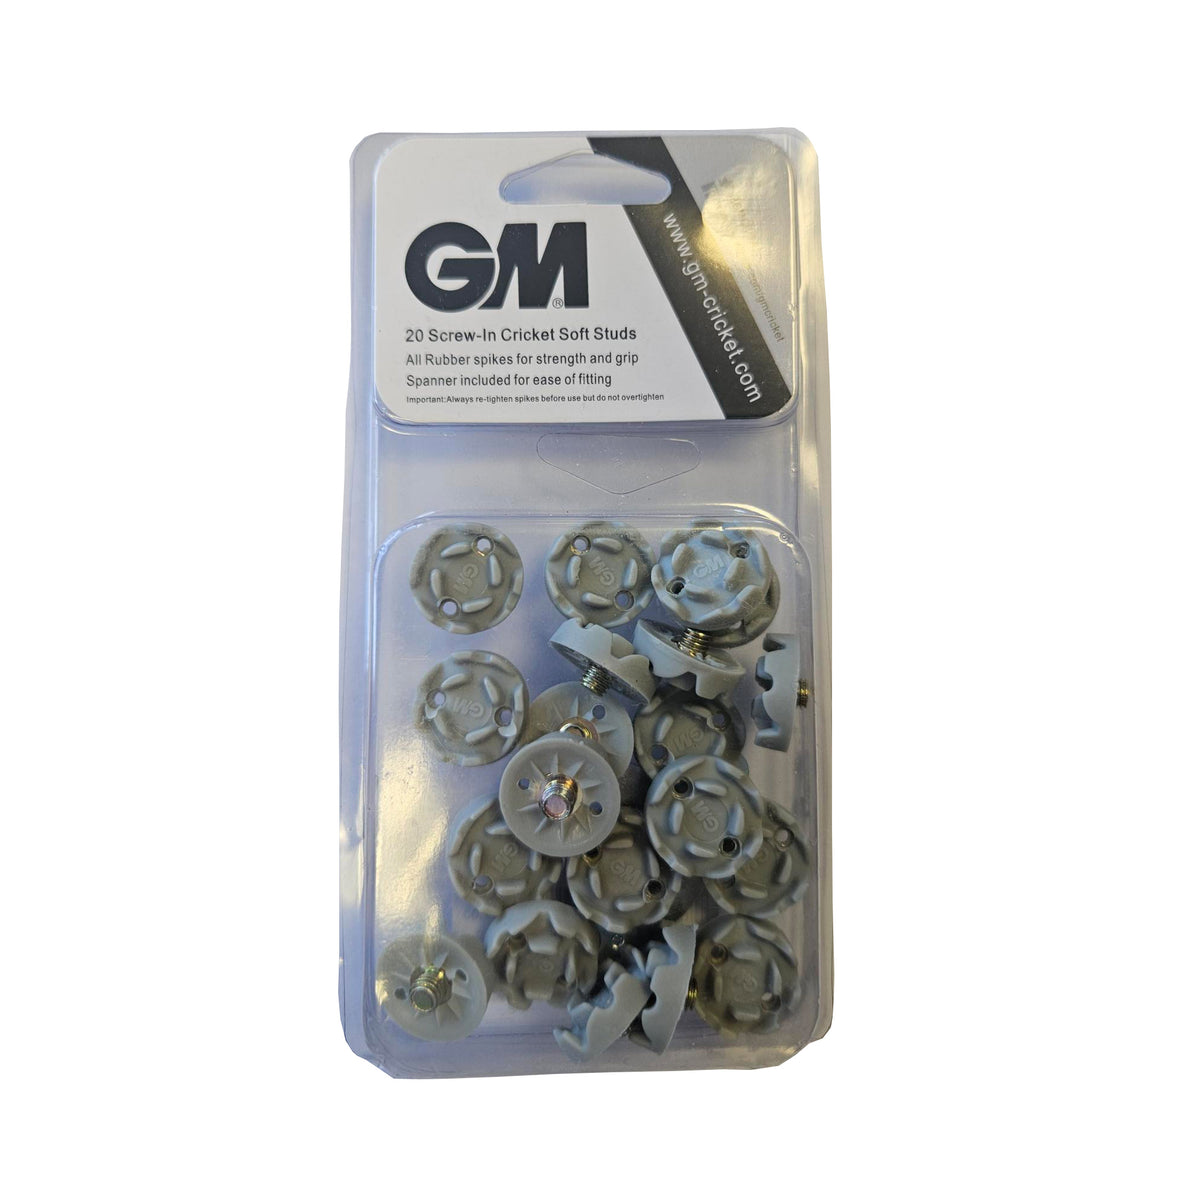 Set of GM Soft Cricket Spikes